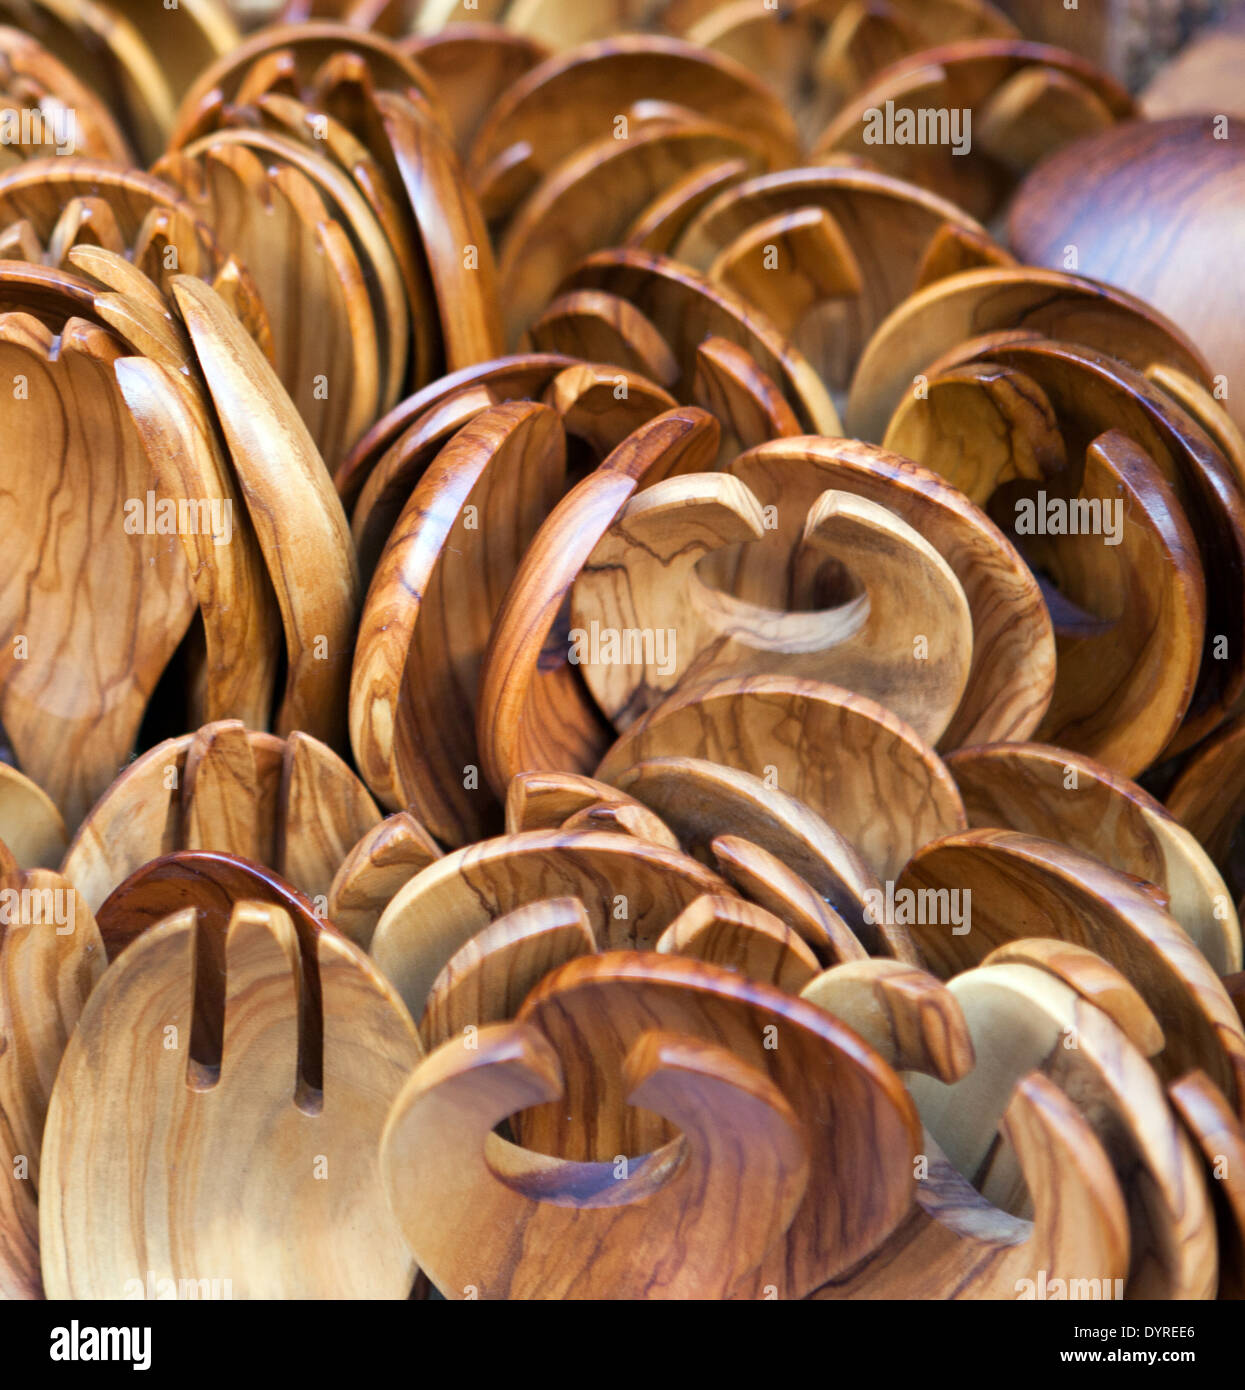 Salad spoons and forks made of olive wood on sale as tourist mementoes in Greece Stock Photo